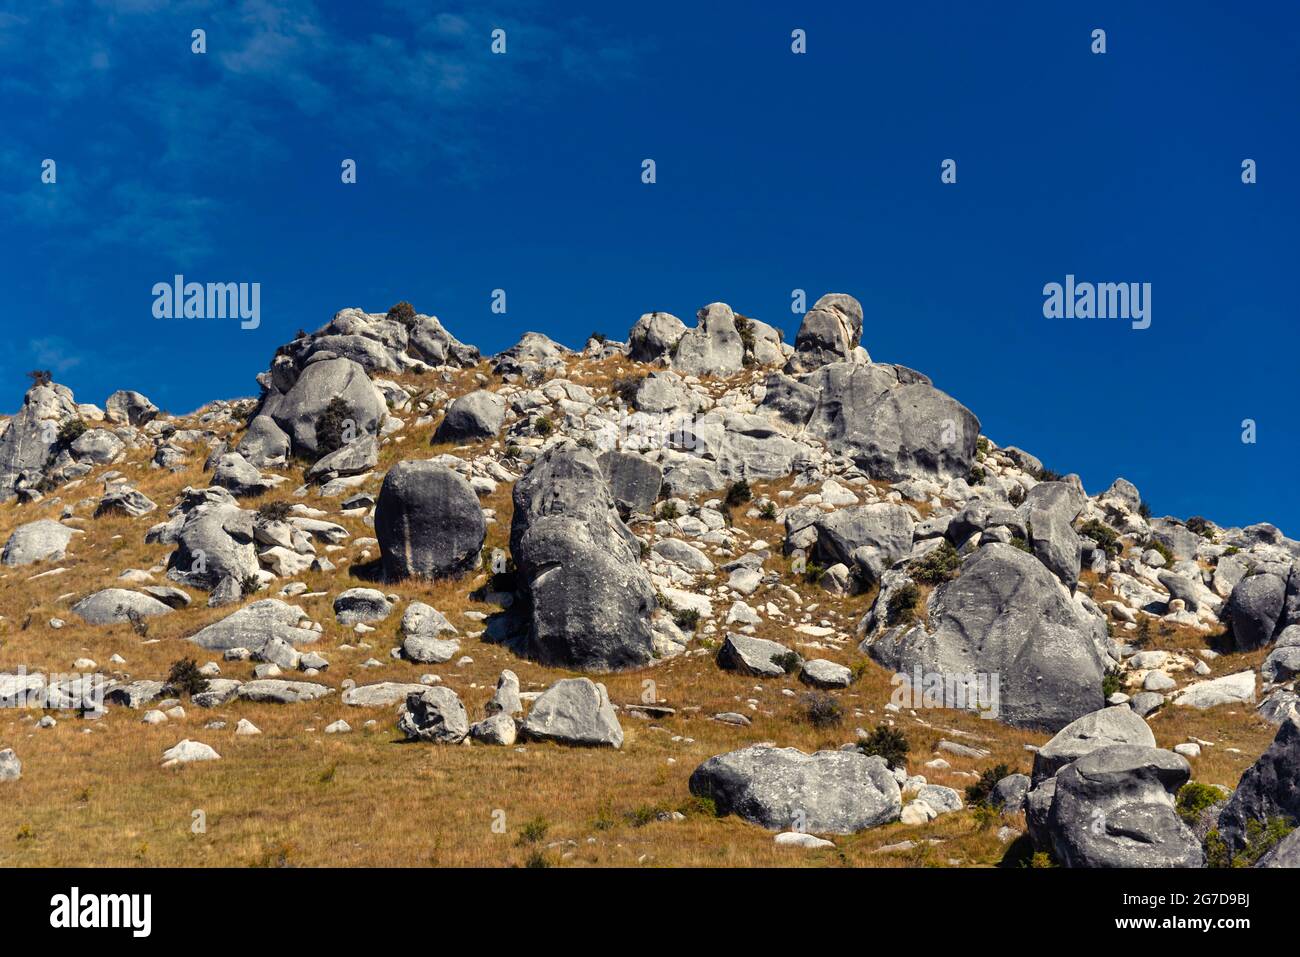 Stunning rock boulders at Castle Hill, New Zealand. Blue cloudy sky, golden grass land, surrounding mountains of the southern alps. Arthur's pass Stock Photo